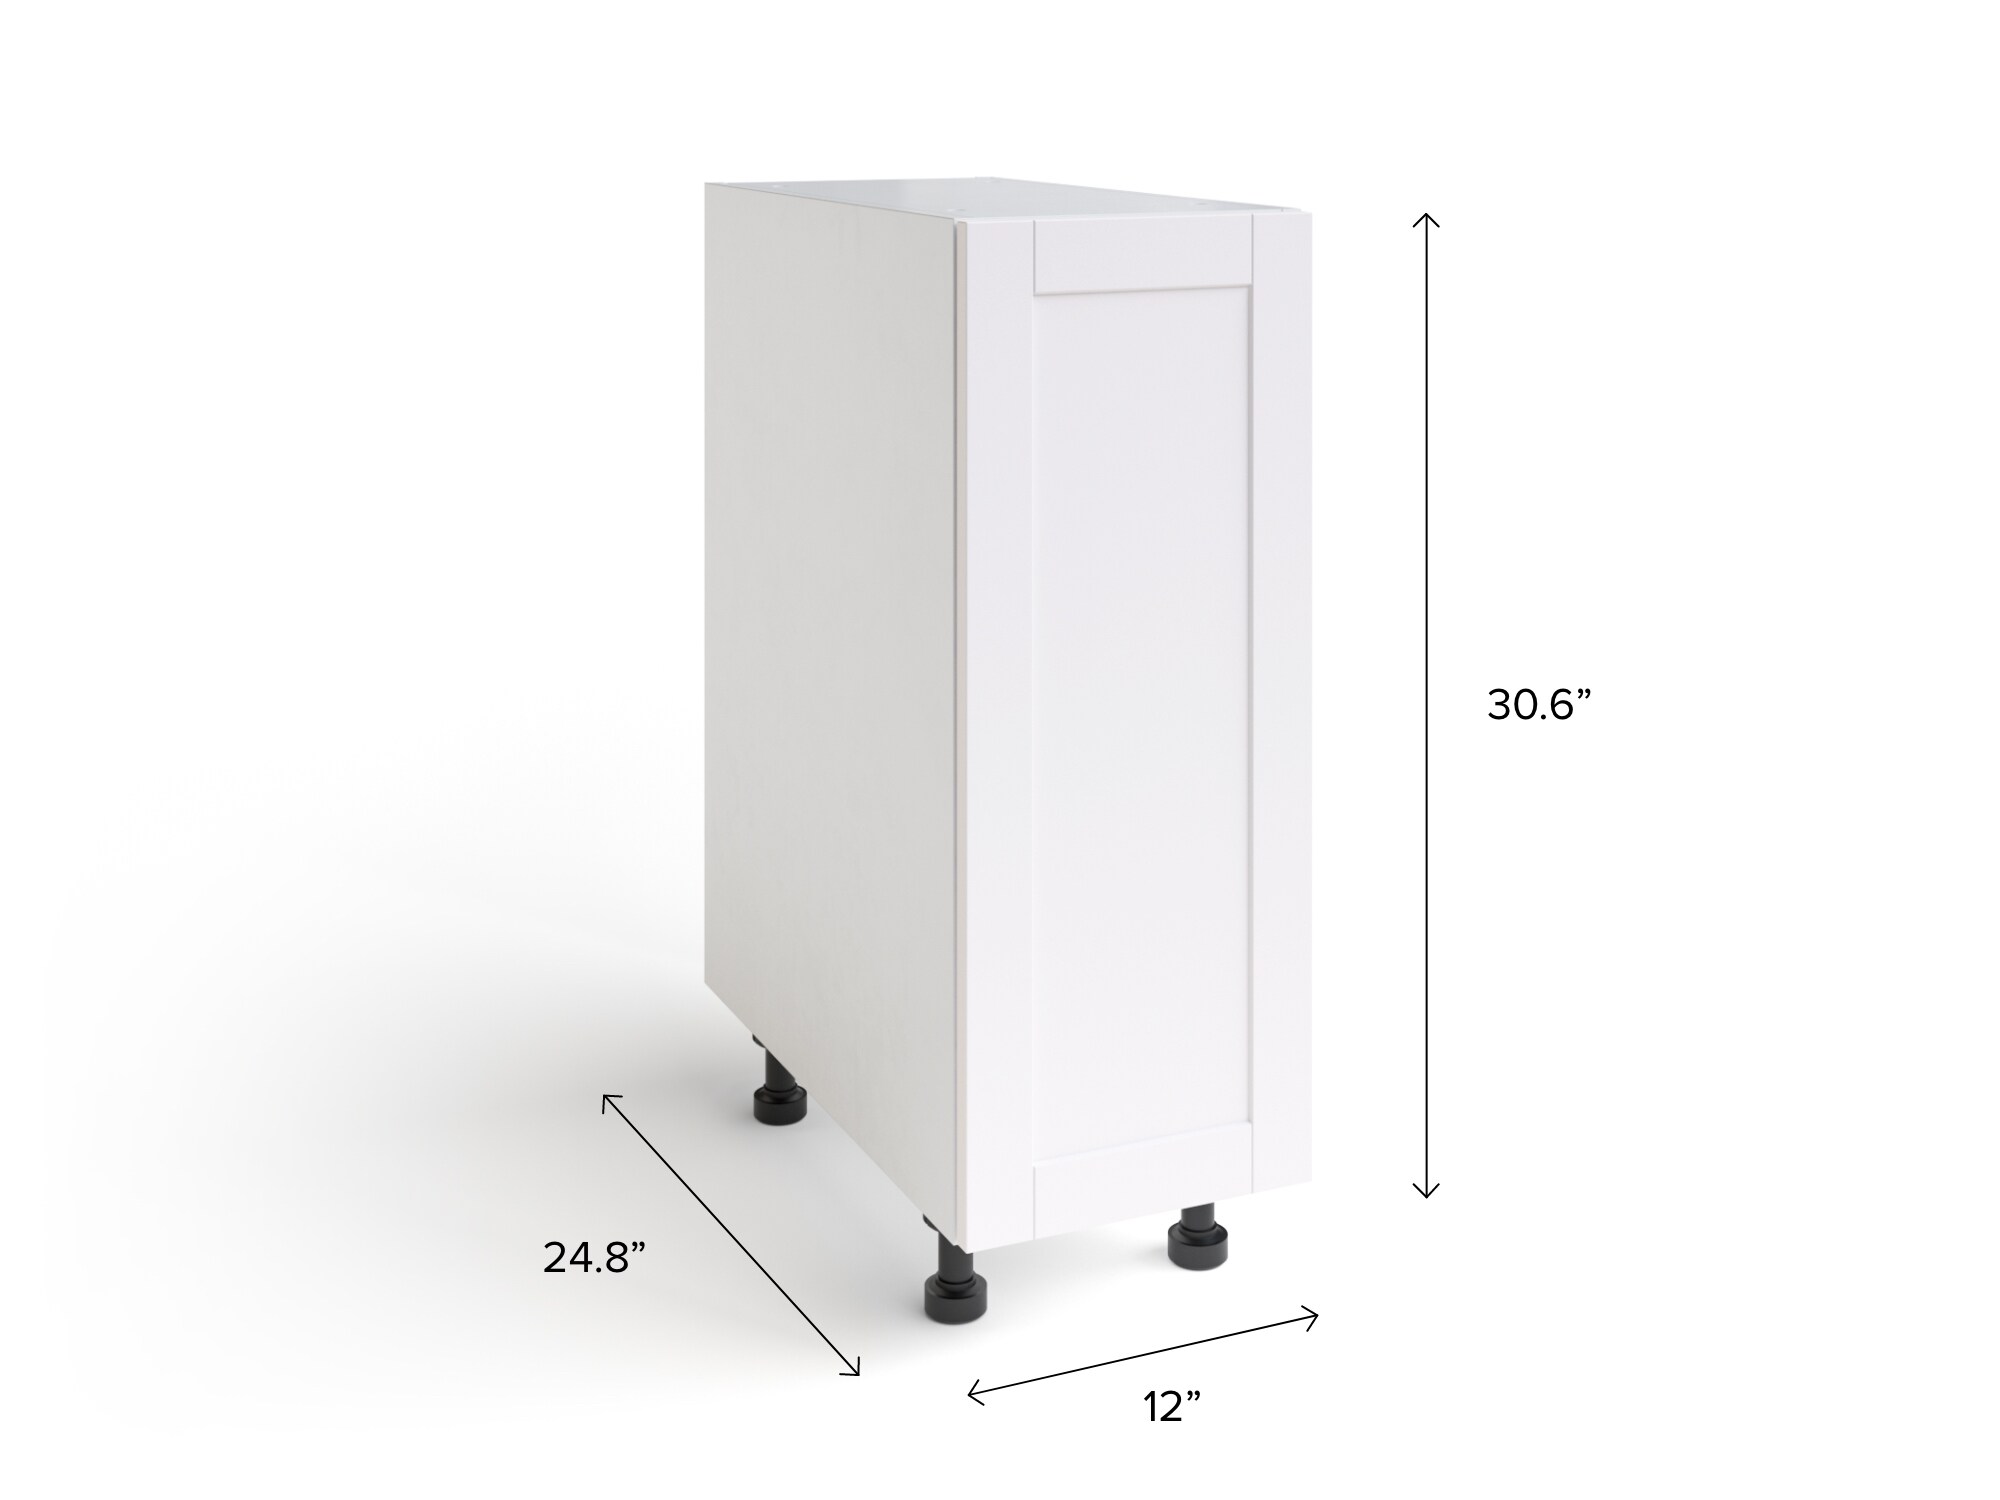 NewAge Products Home Cabinet 12-in W x 30.6-in H x 24.8-in D White Door Base Fully Assembled Stock Cabinet (Shaker Door Style)